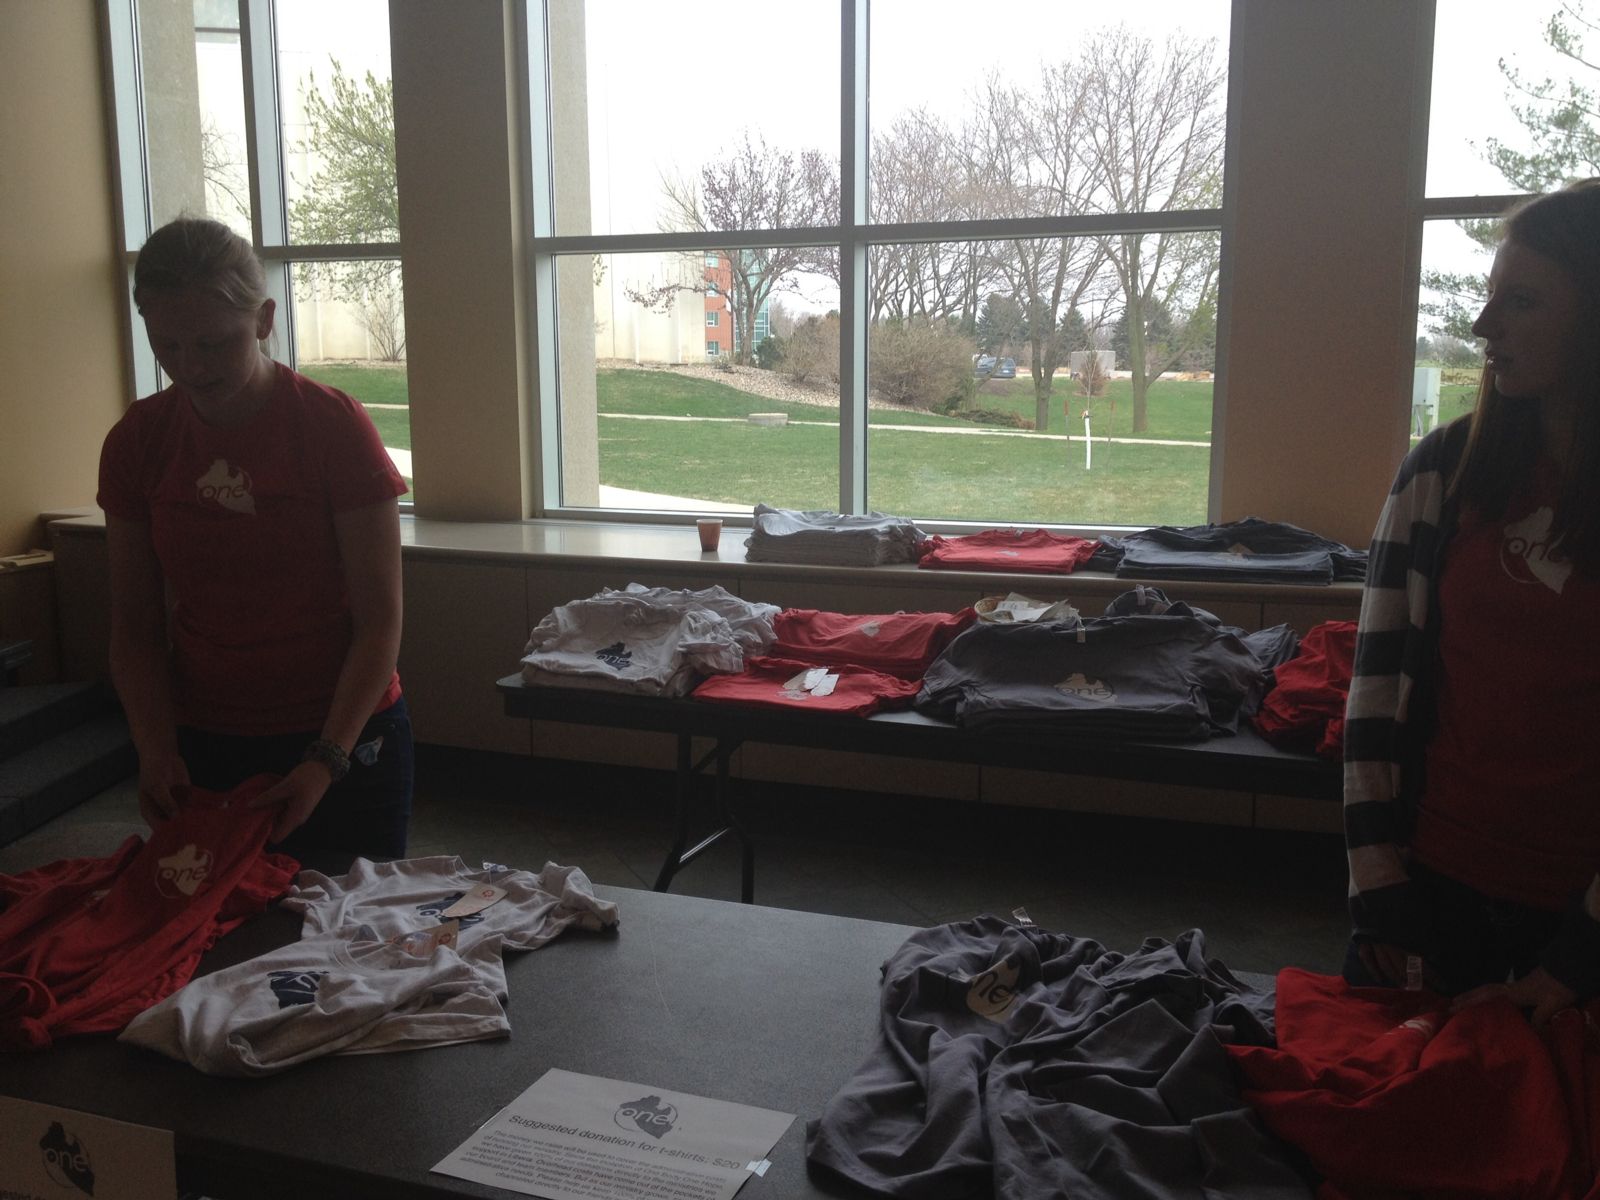  Preparing the t-shirt displays to help cover administration costs, so all donations can go directly to our sister community. 